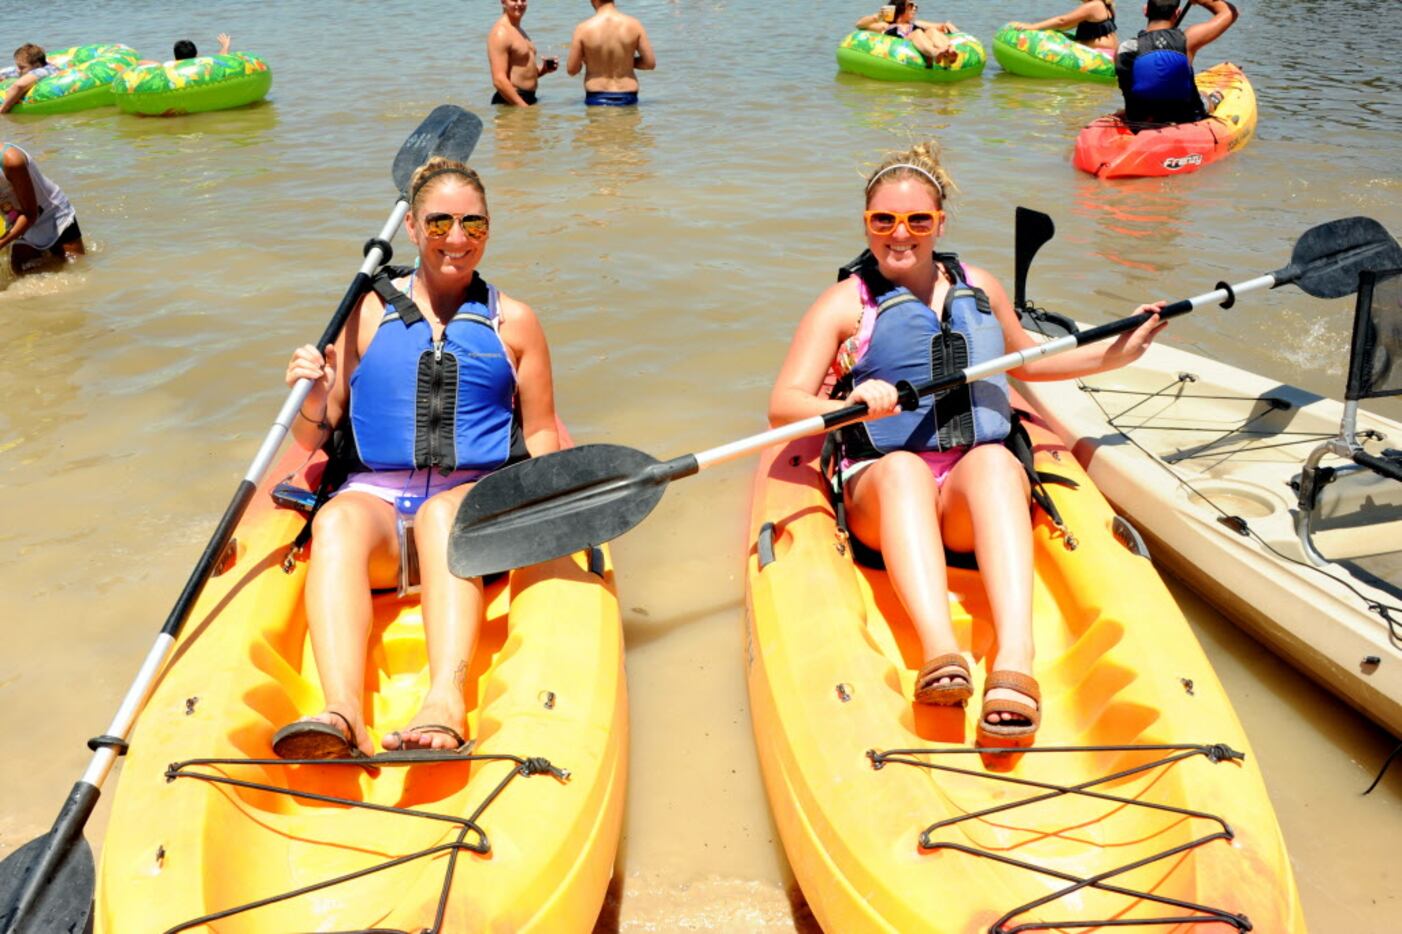 Friends canoe in the Trinity River at Sunday Funday at Panther Island Pavilion